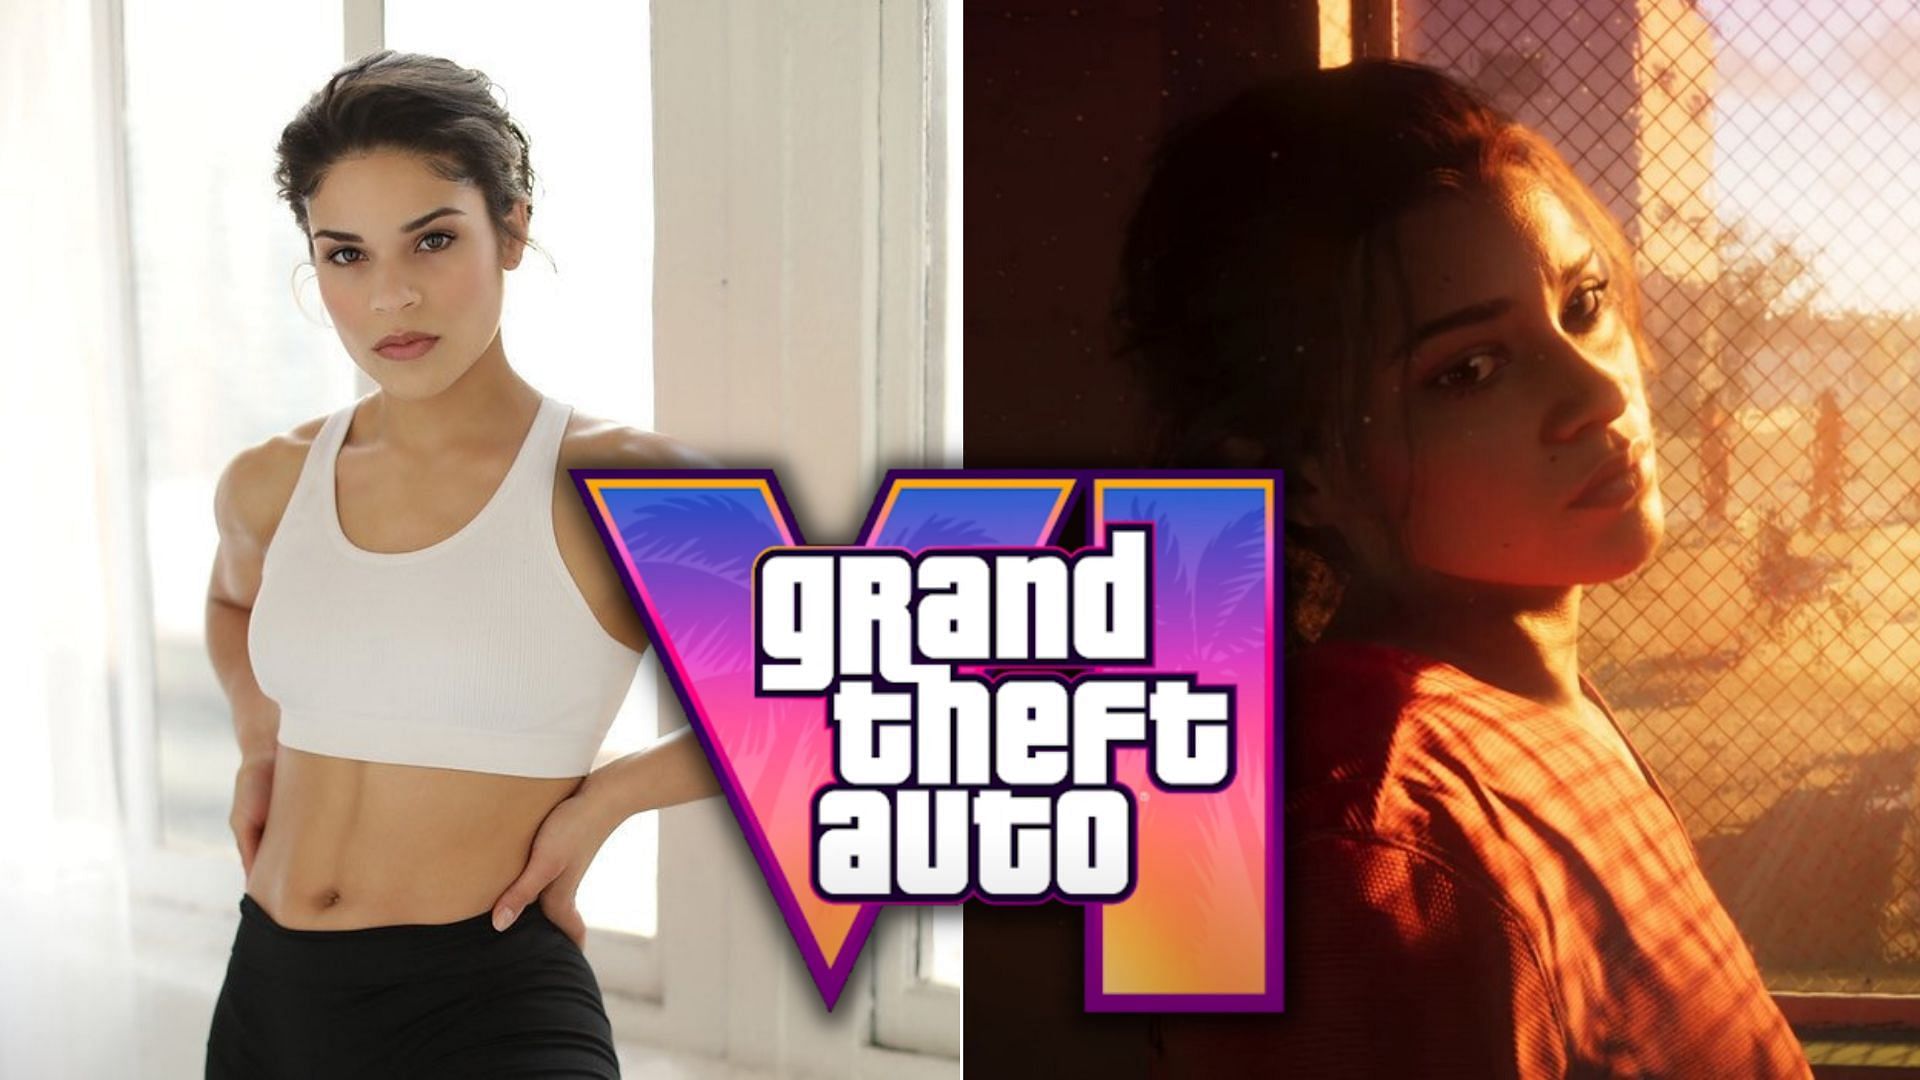 After Ana Esposito, Manni L. Perez is rumored to be GTA 6